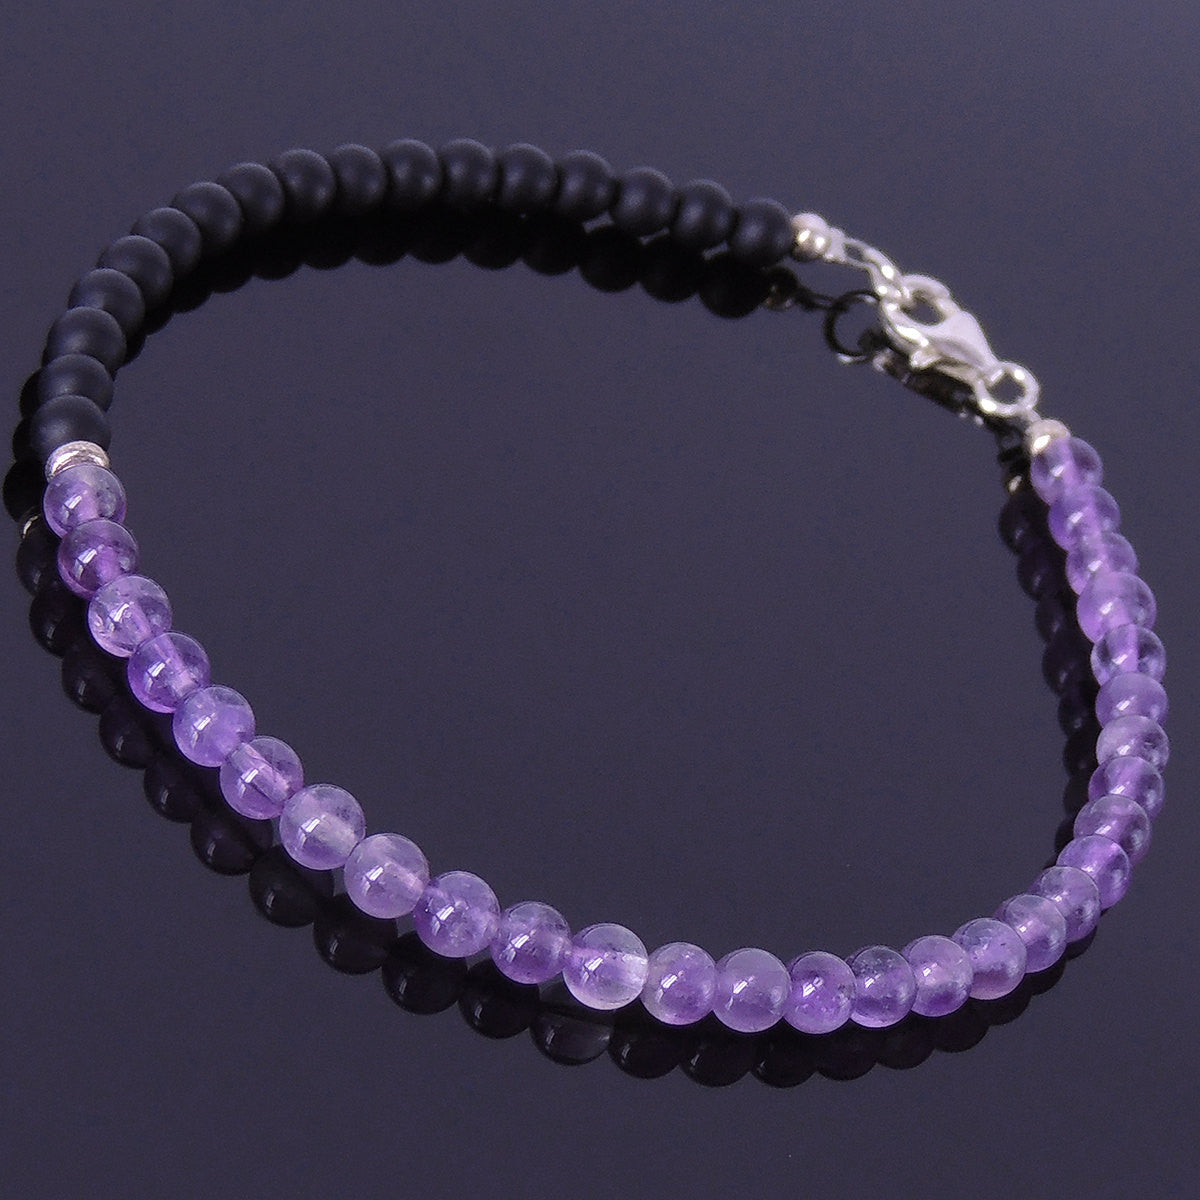 4mm Amethyst & Matte Black Onyx Healing Gemstone Anklet with S925 Sterling Silver Spacer Beads & Clasp - Handmade by Gem & Silver AN008